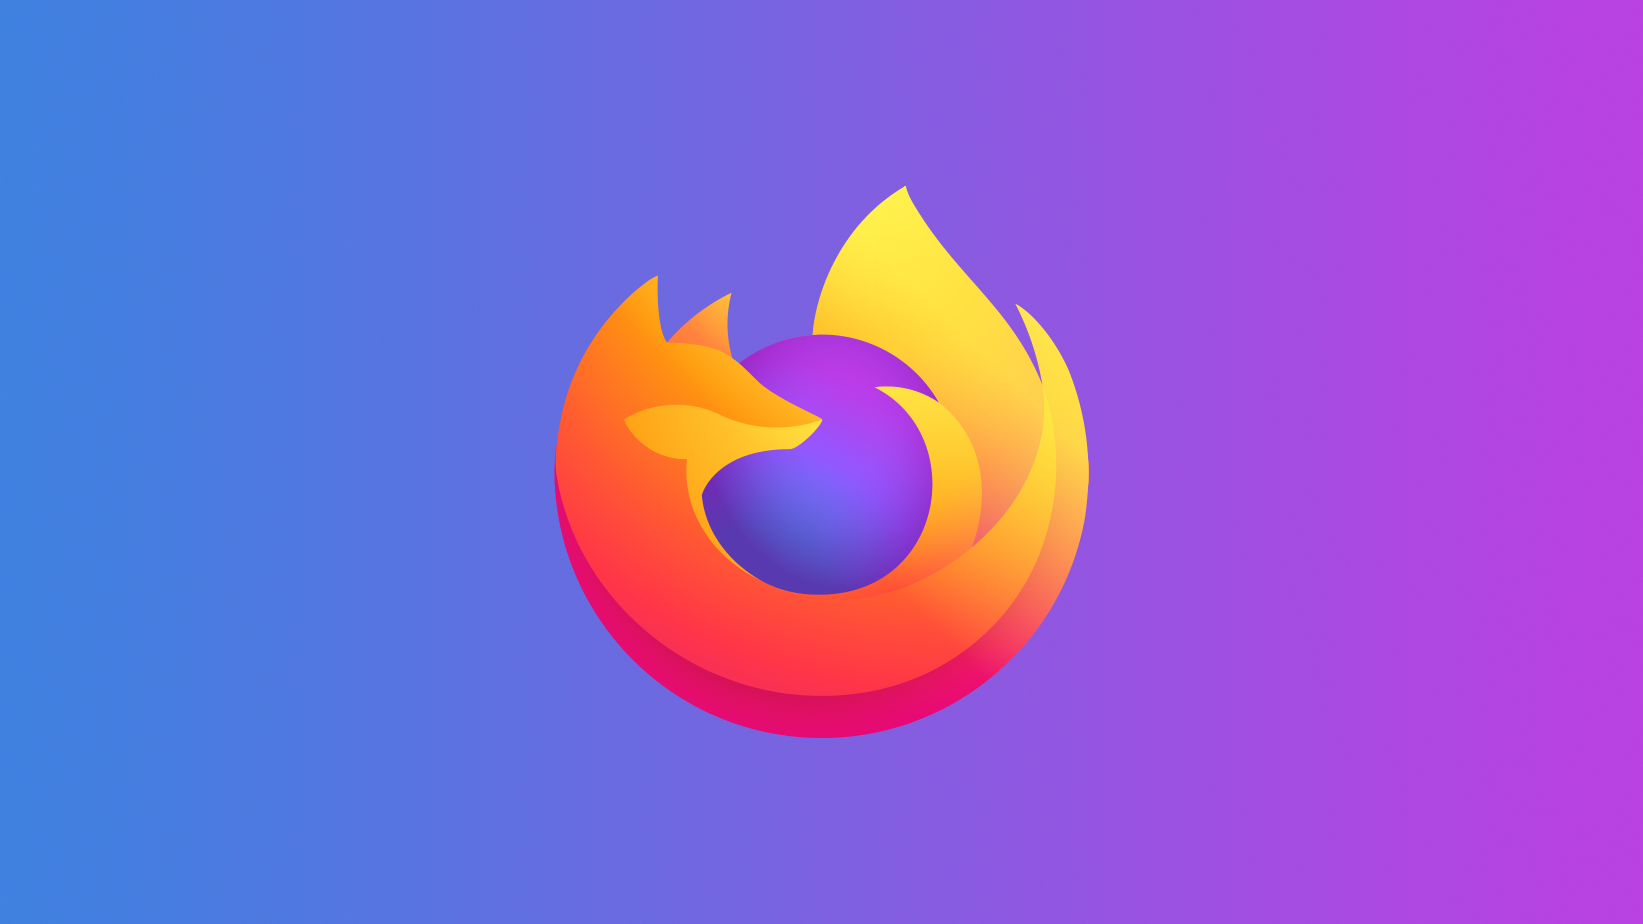 Firefox is Now on  Fire TV - Happy Holiday Watching